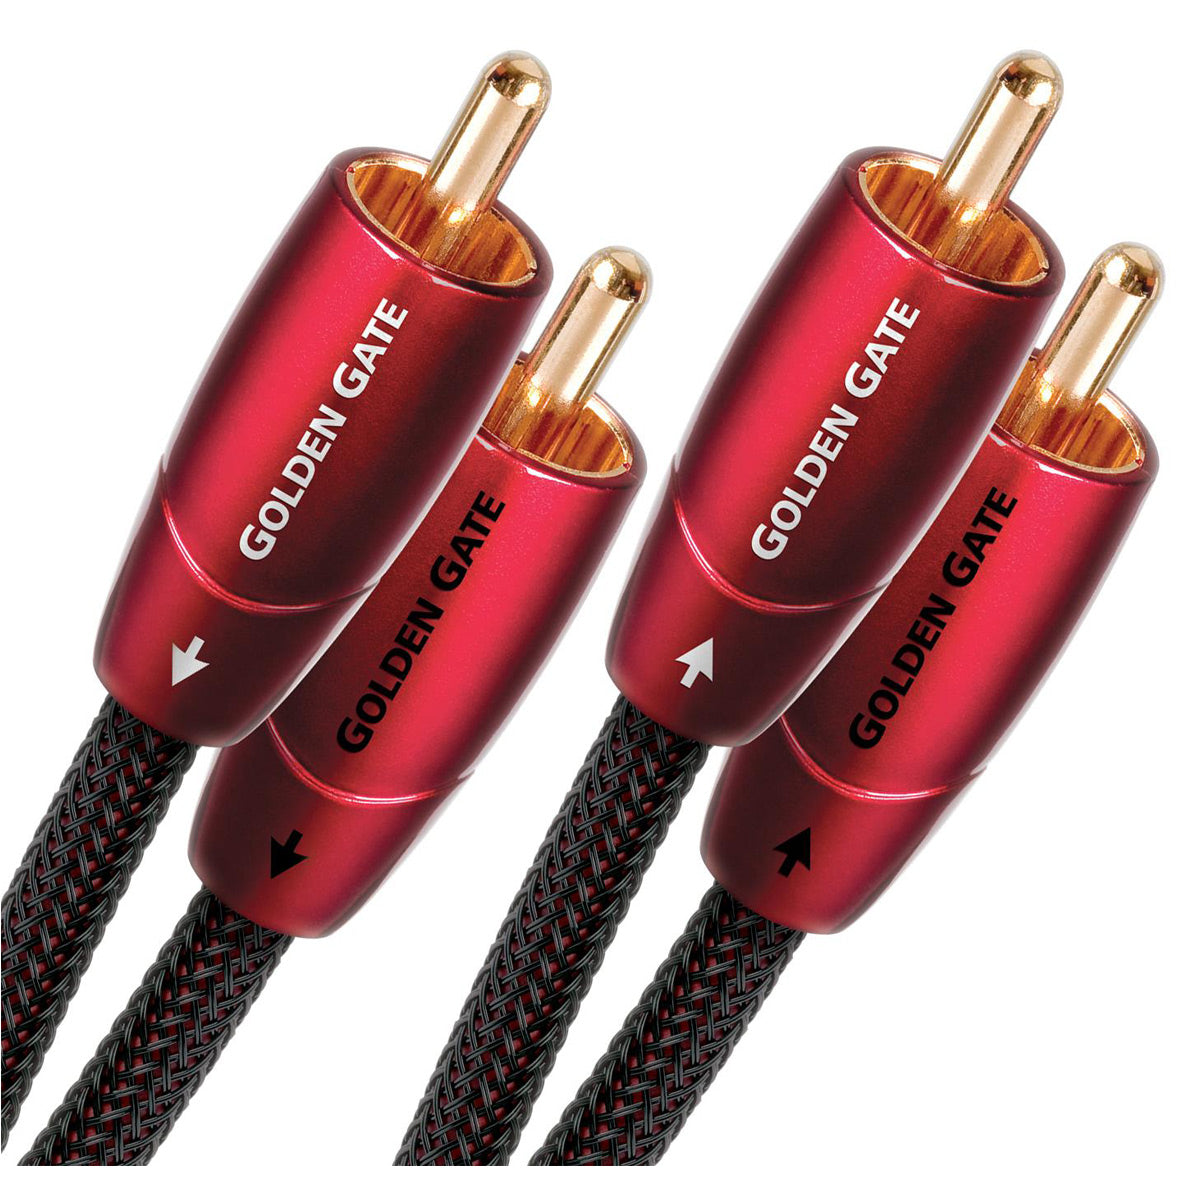 AudioQuest Golden Gate RCA Male to RCA Male Cable - 6.56 ft. (2m)